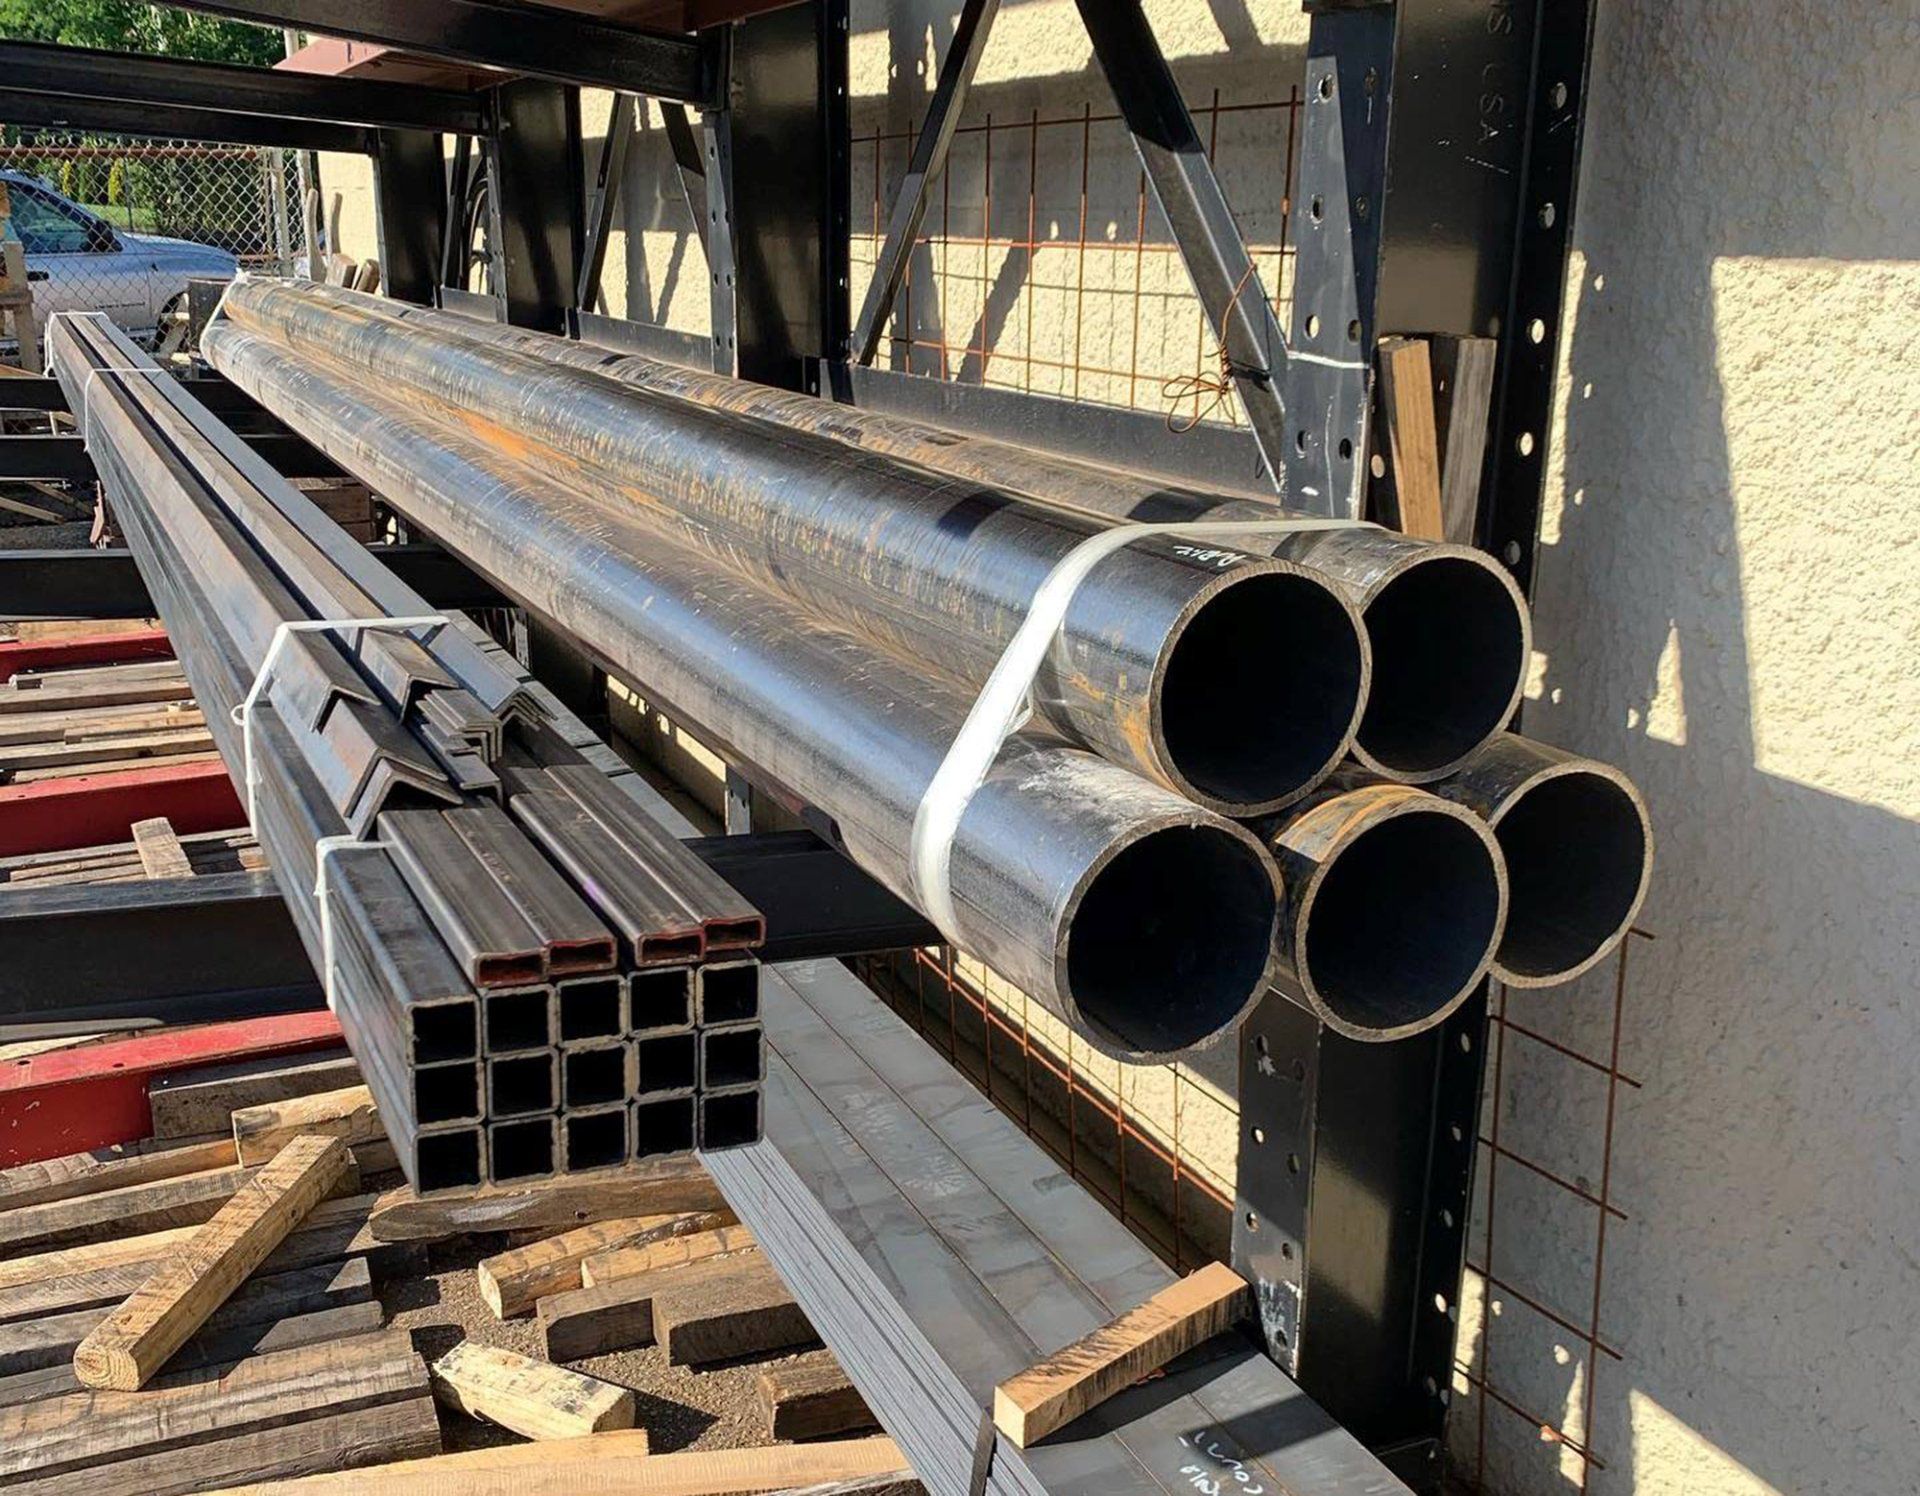 Carbon Steel Metal Products  Steel bar, plate, sheet, structural, pipe,  tube, grating, expanded